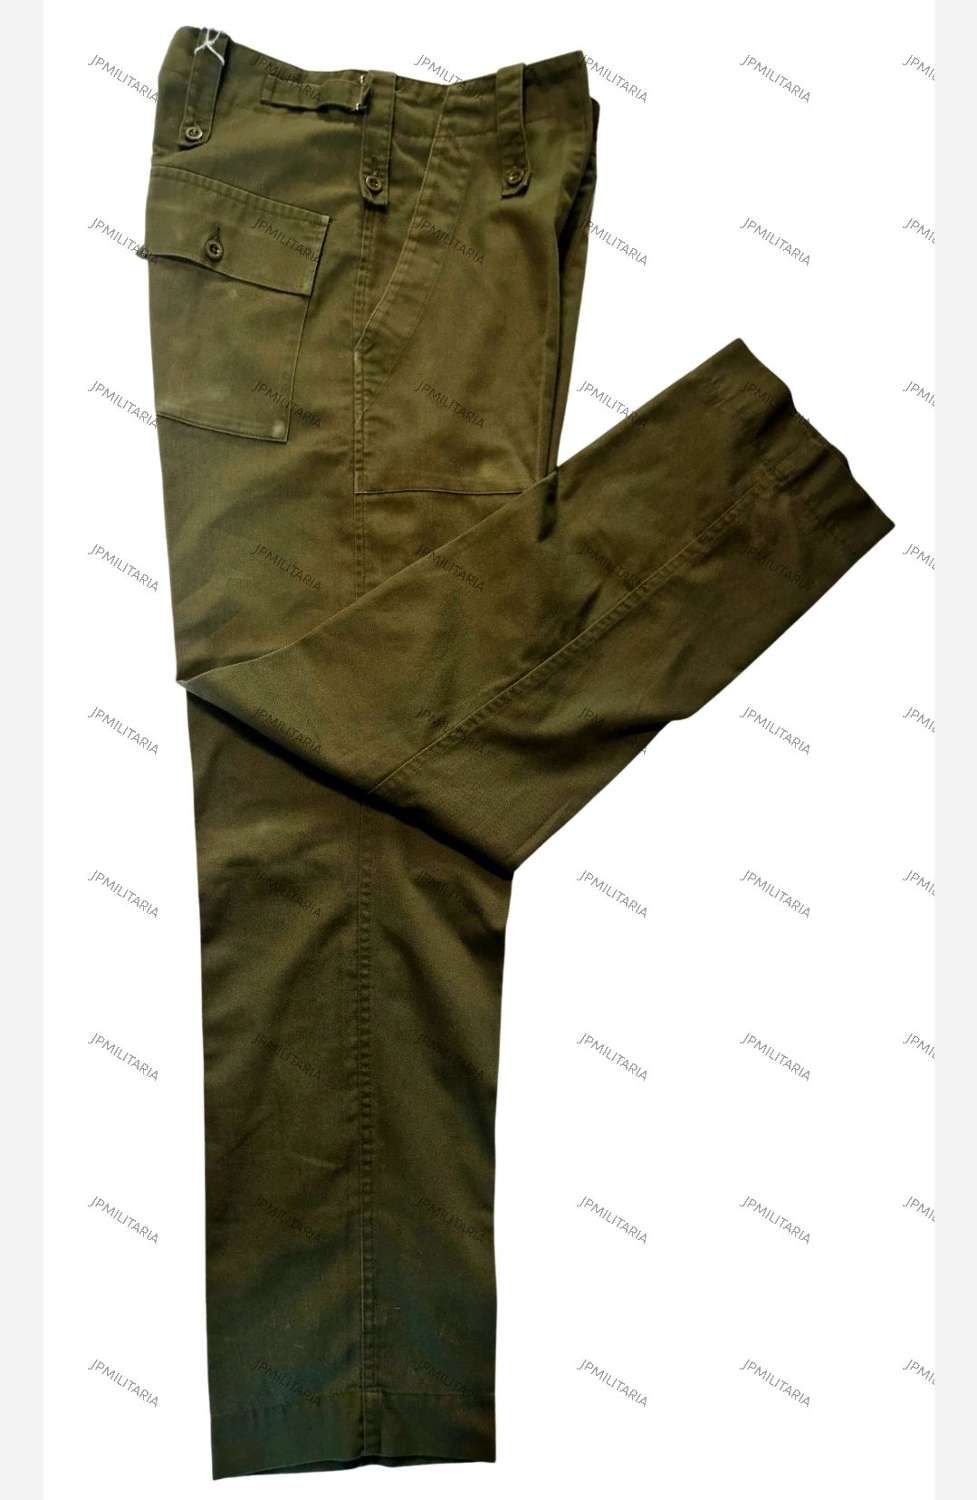 British Army Light weight trousers